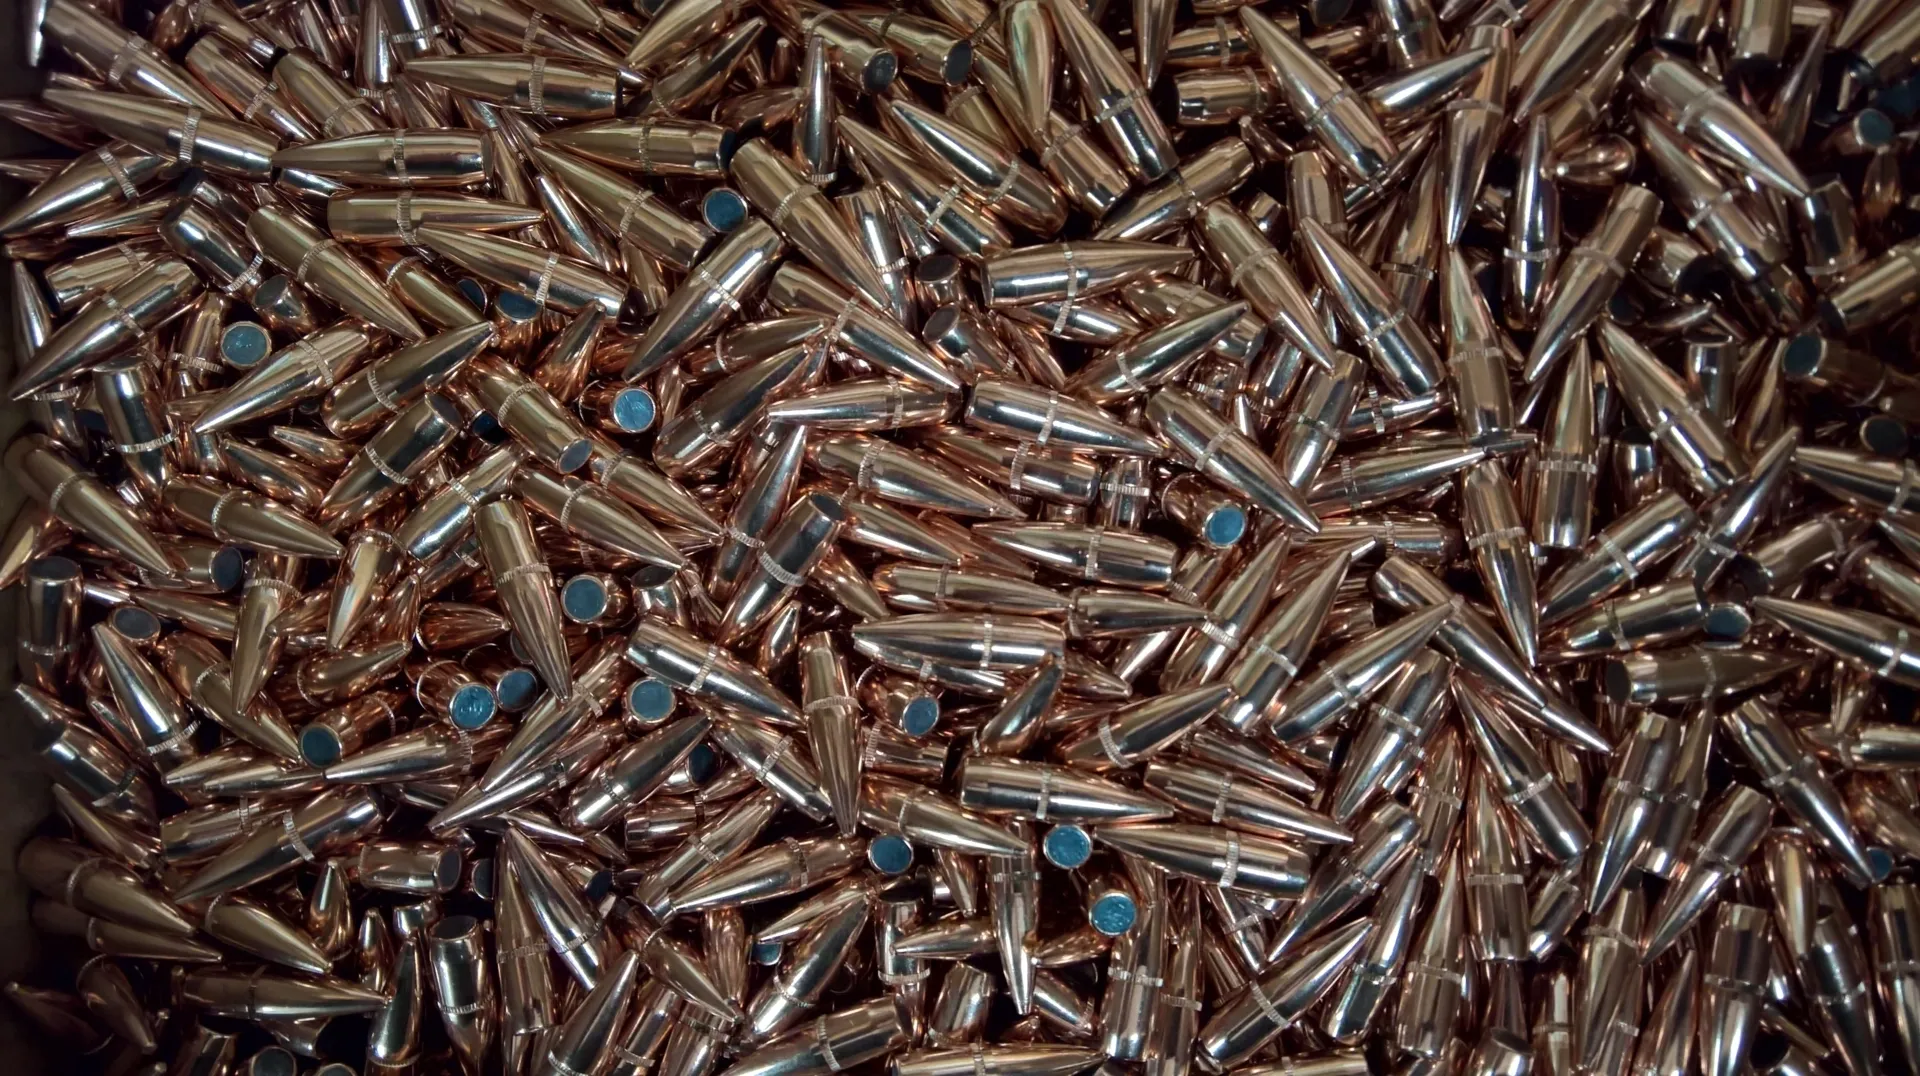 A pile of bullet casings that are sitting on the ground.